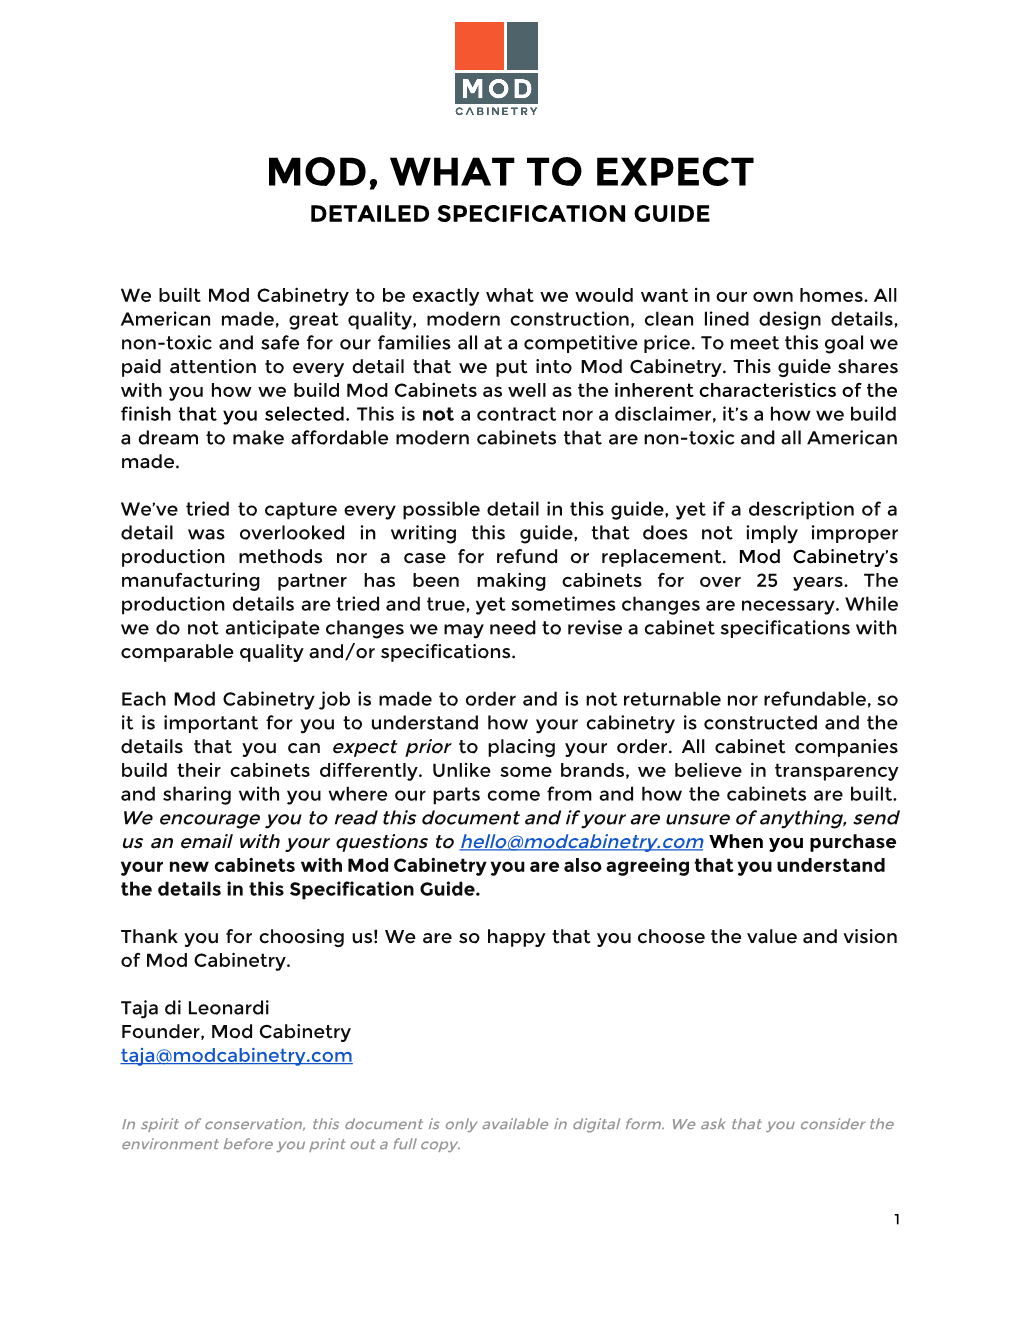 Mod, What to Expect Detailed Specification Guide